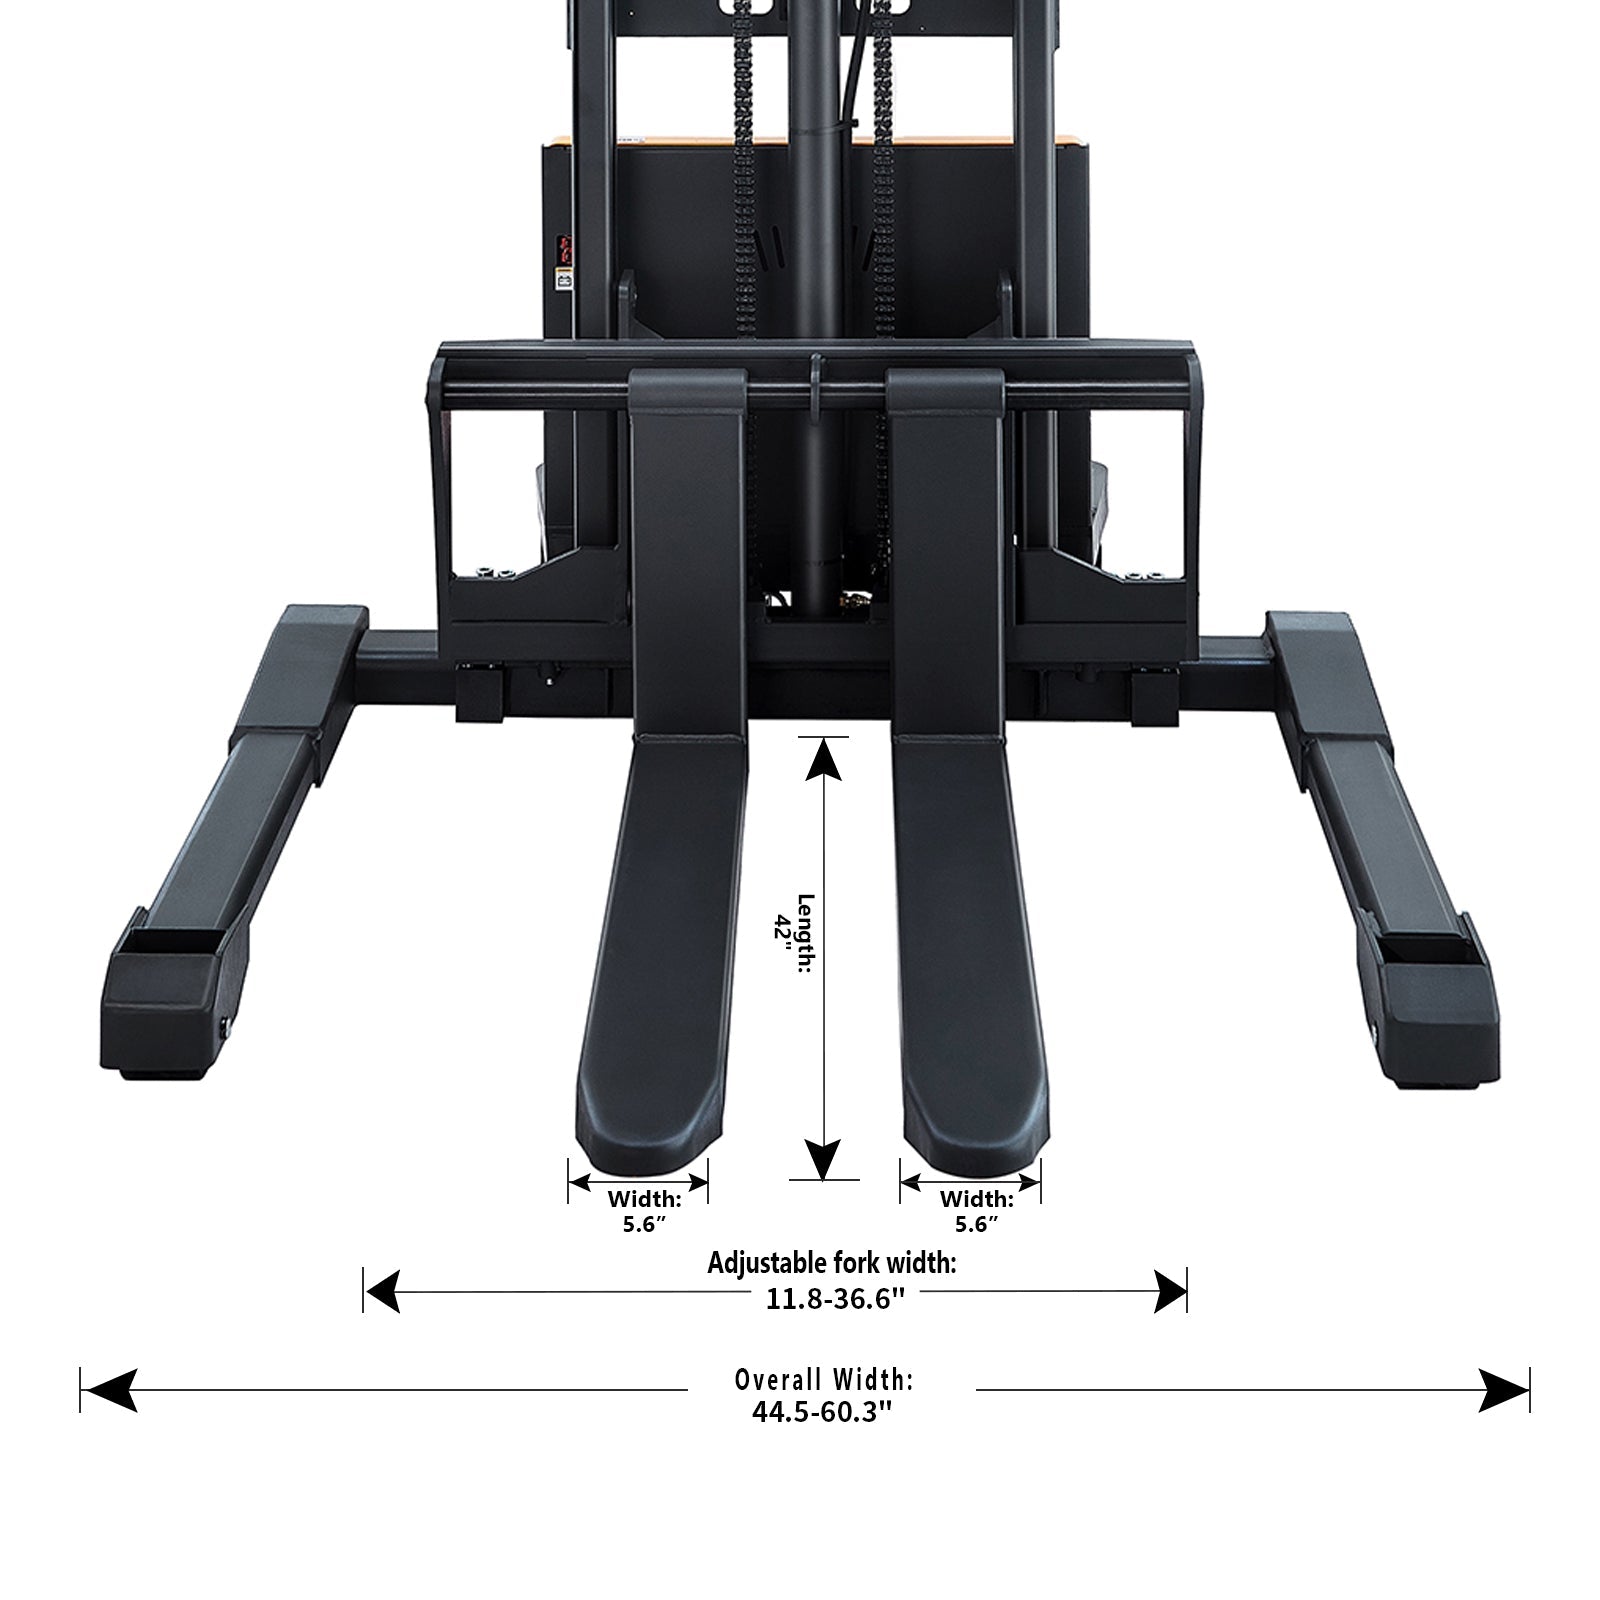 ApolloLift | Power Lift Straddle Stacker 3300Lbs 118"Lifting